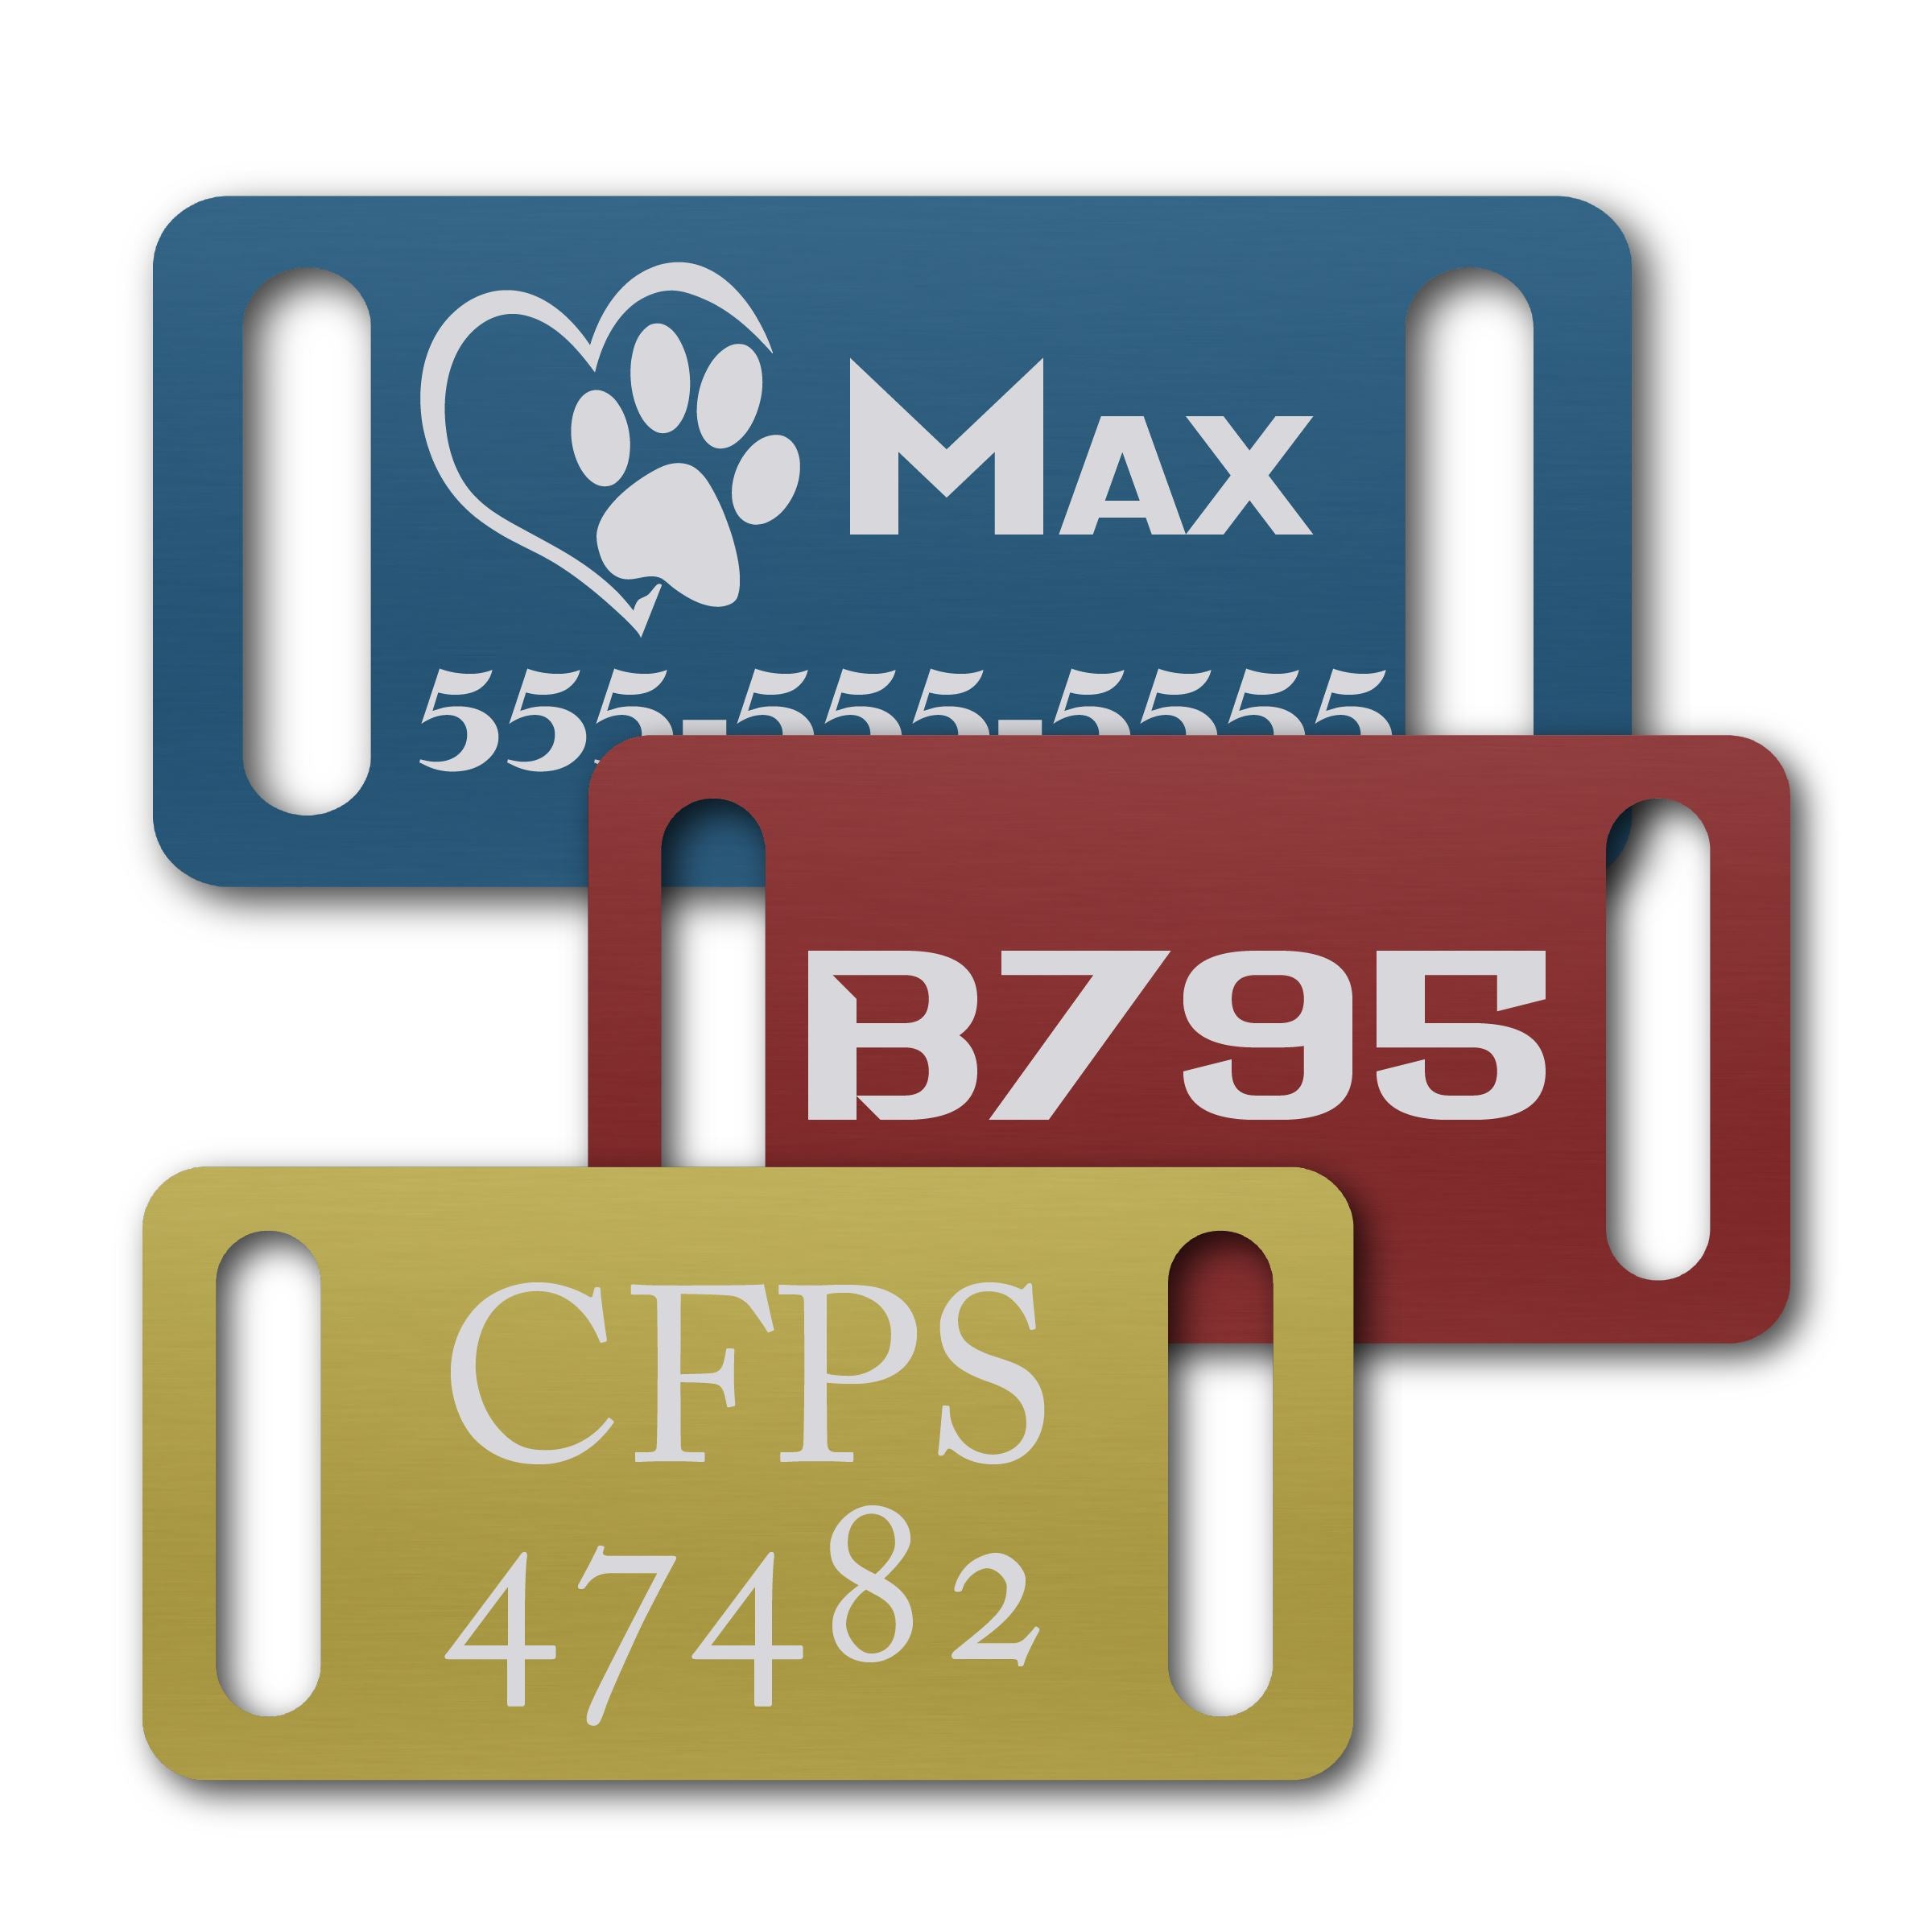 Anodized Aluminum Rectangle Slide-On Tags, 1-3/16" x 2" with 1/4" x 1" Slot, Laser Engraved Metal Tags Craftworks NW 